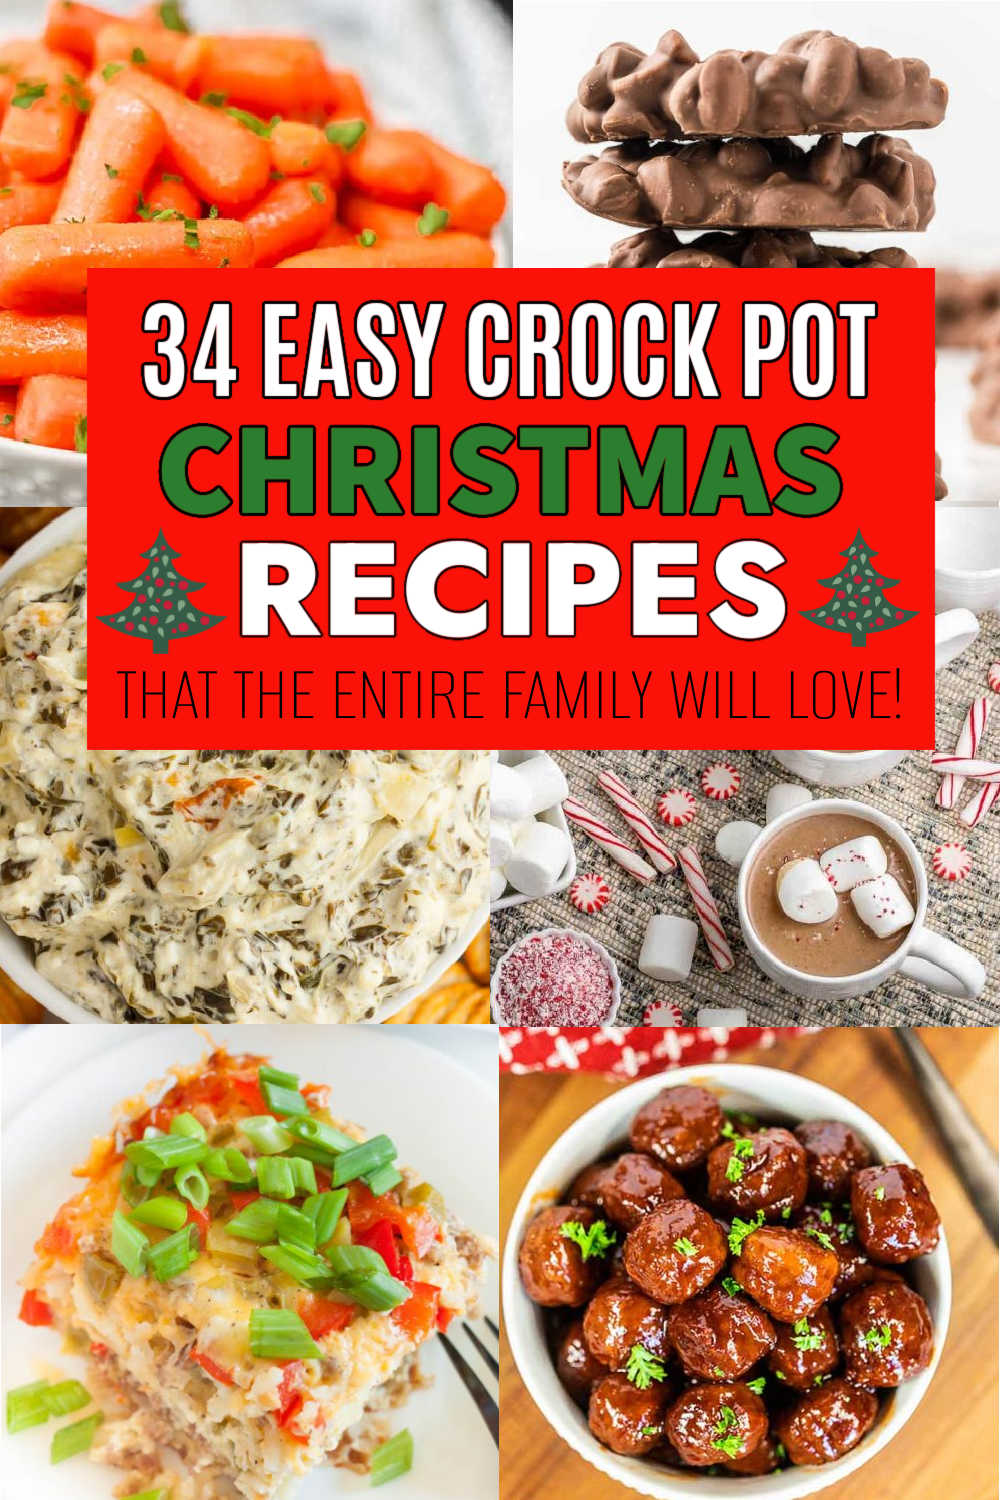 80+ Christmas Crockpot Recipes - Merry About Town